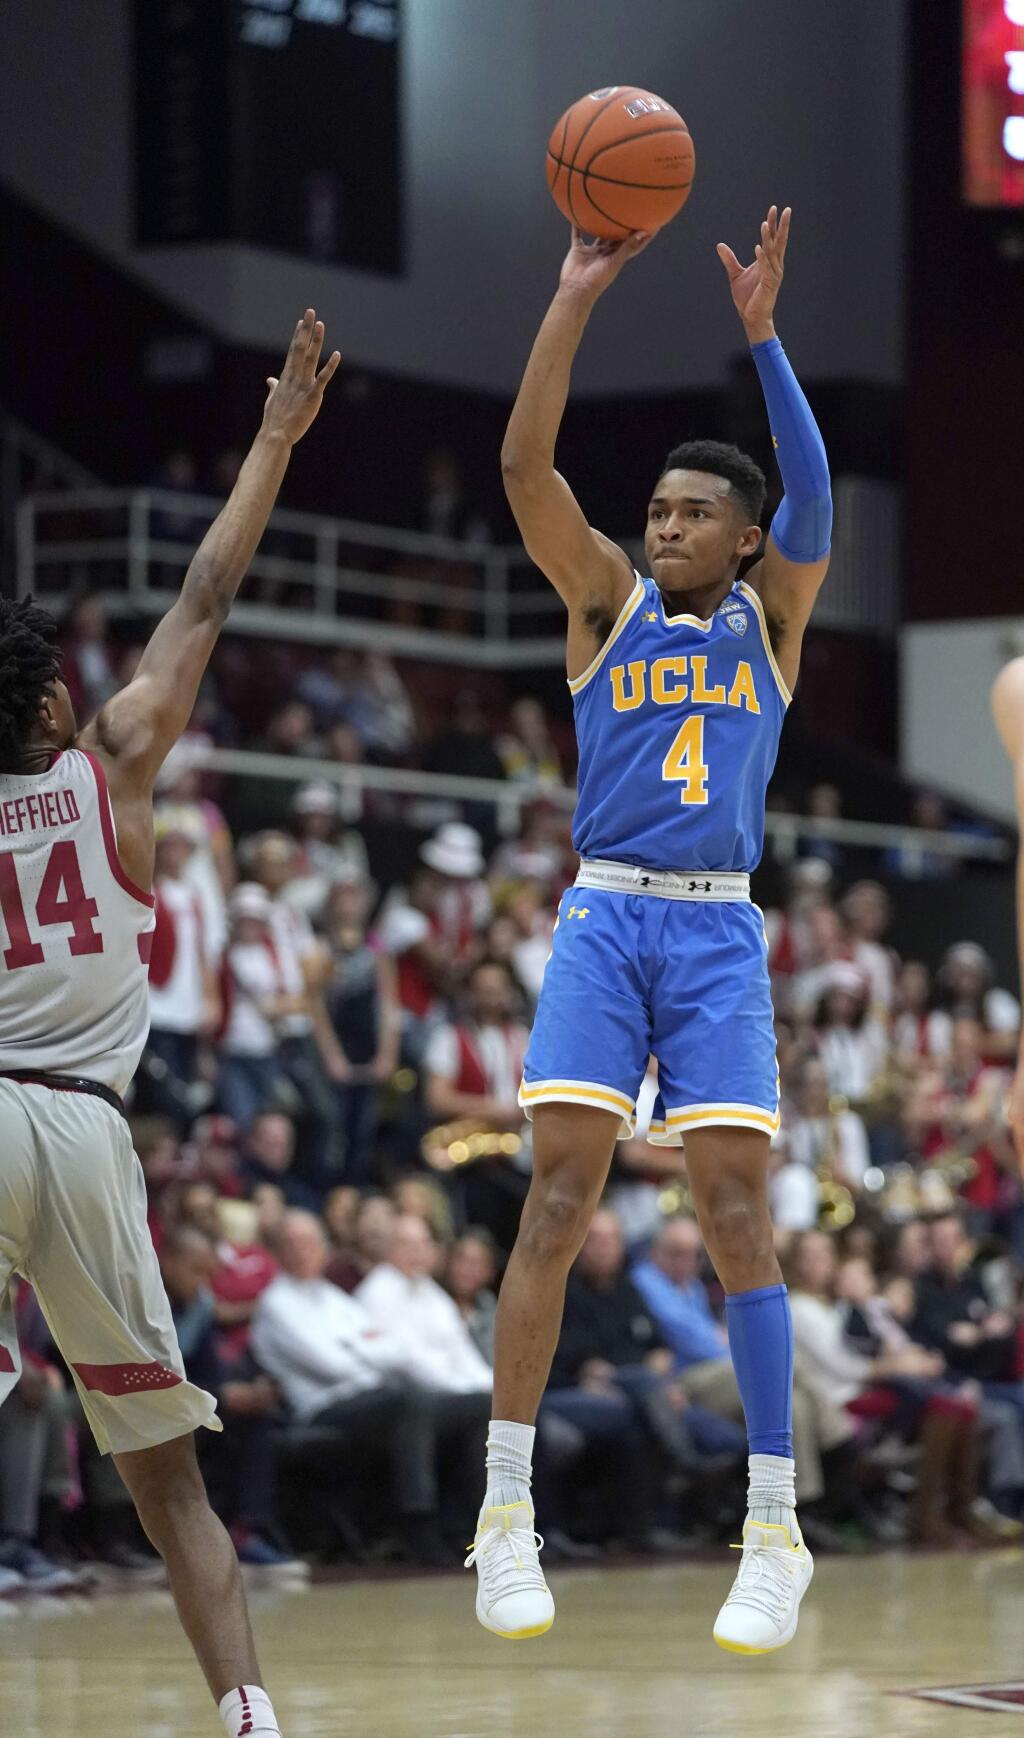 UCLA guard Jaylen Hands (4) takes a 3-point shot over Stanford guard Marcus Sheffield (14) during the first half of an NCAA college basketball game Saturday, Feb. 16, 2019, in Stanford, Calif. (AP Photo/Tony Avelar)